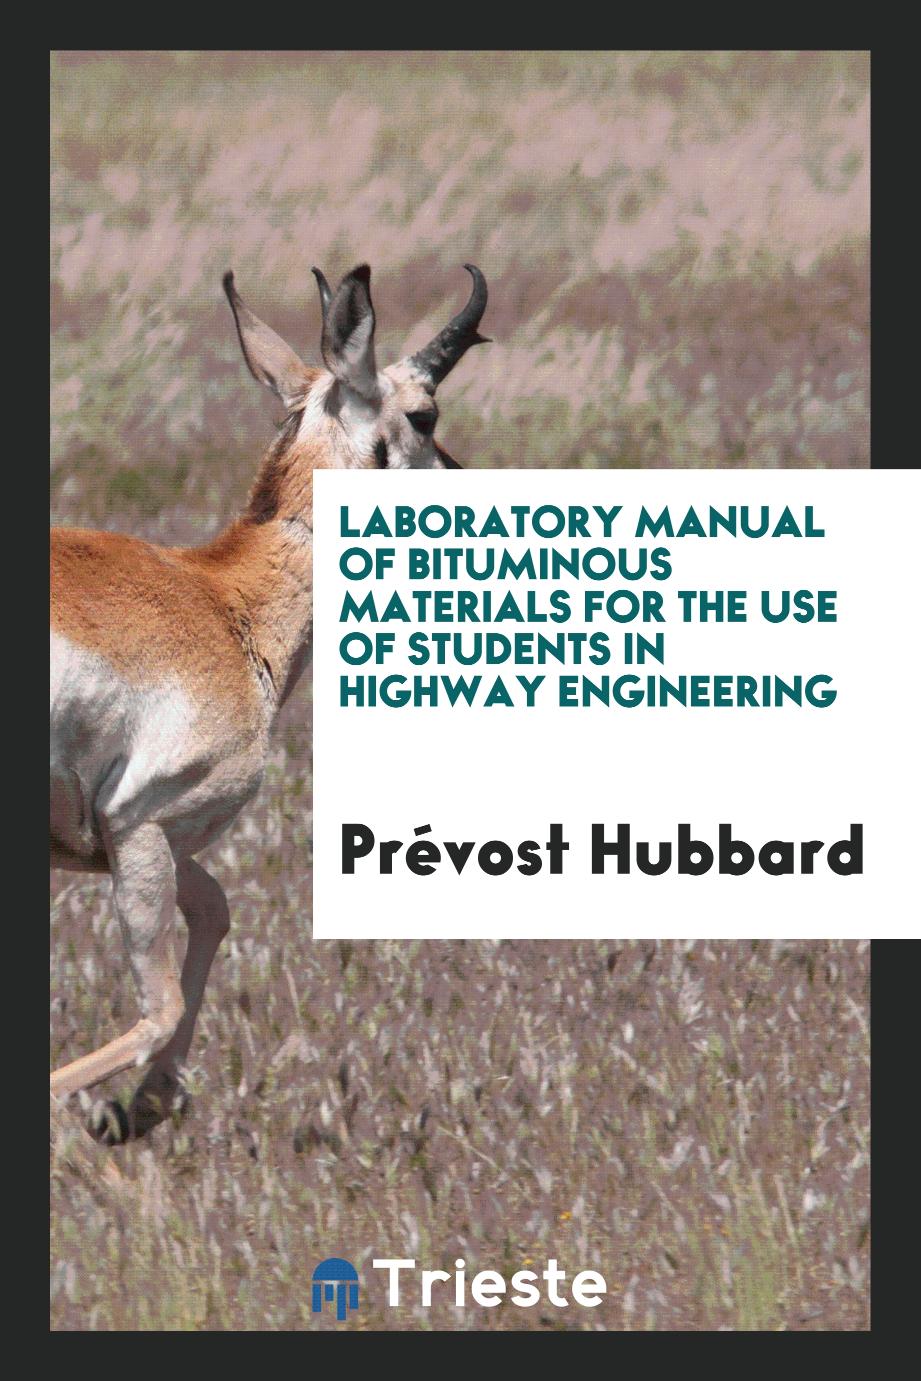 Laboratory manual of bituminous materials for the use of students in highway engineering